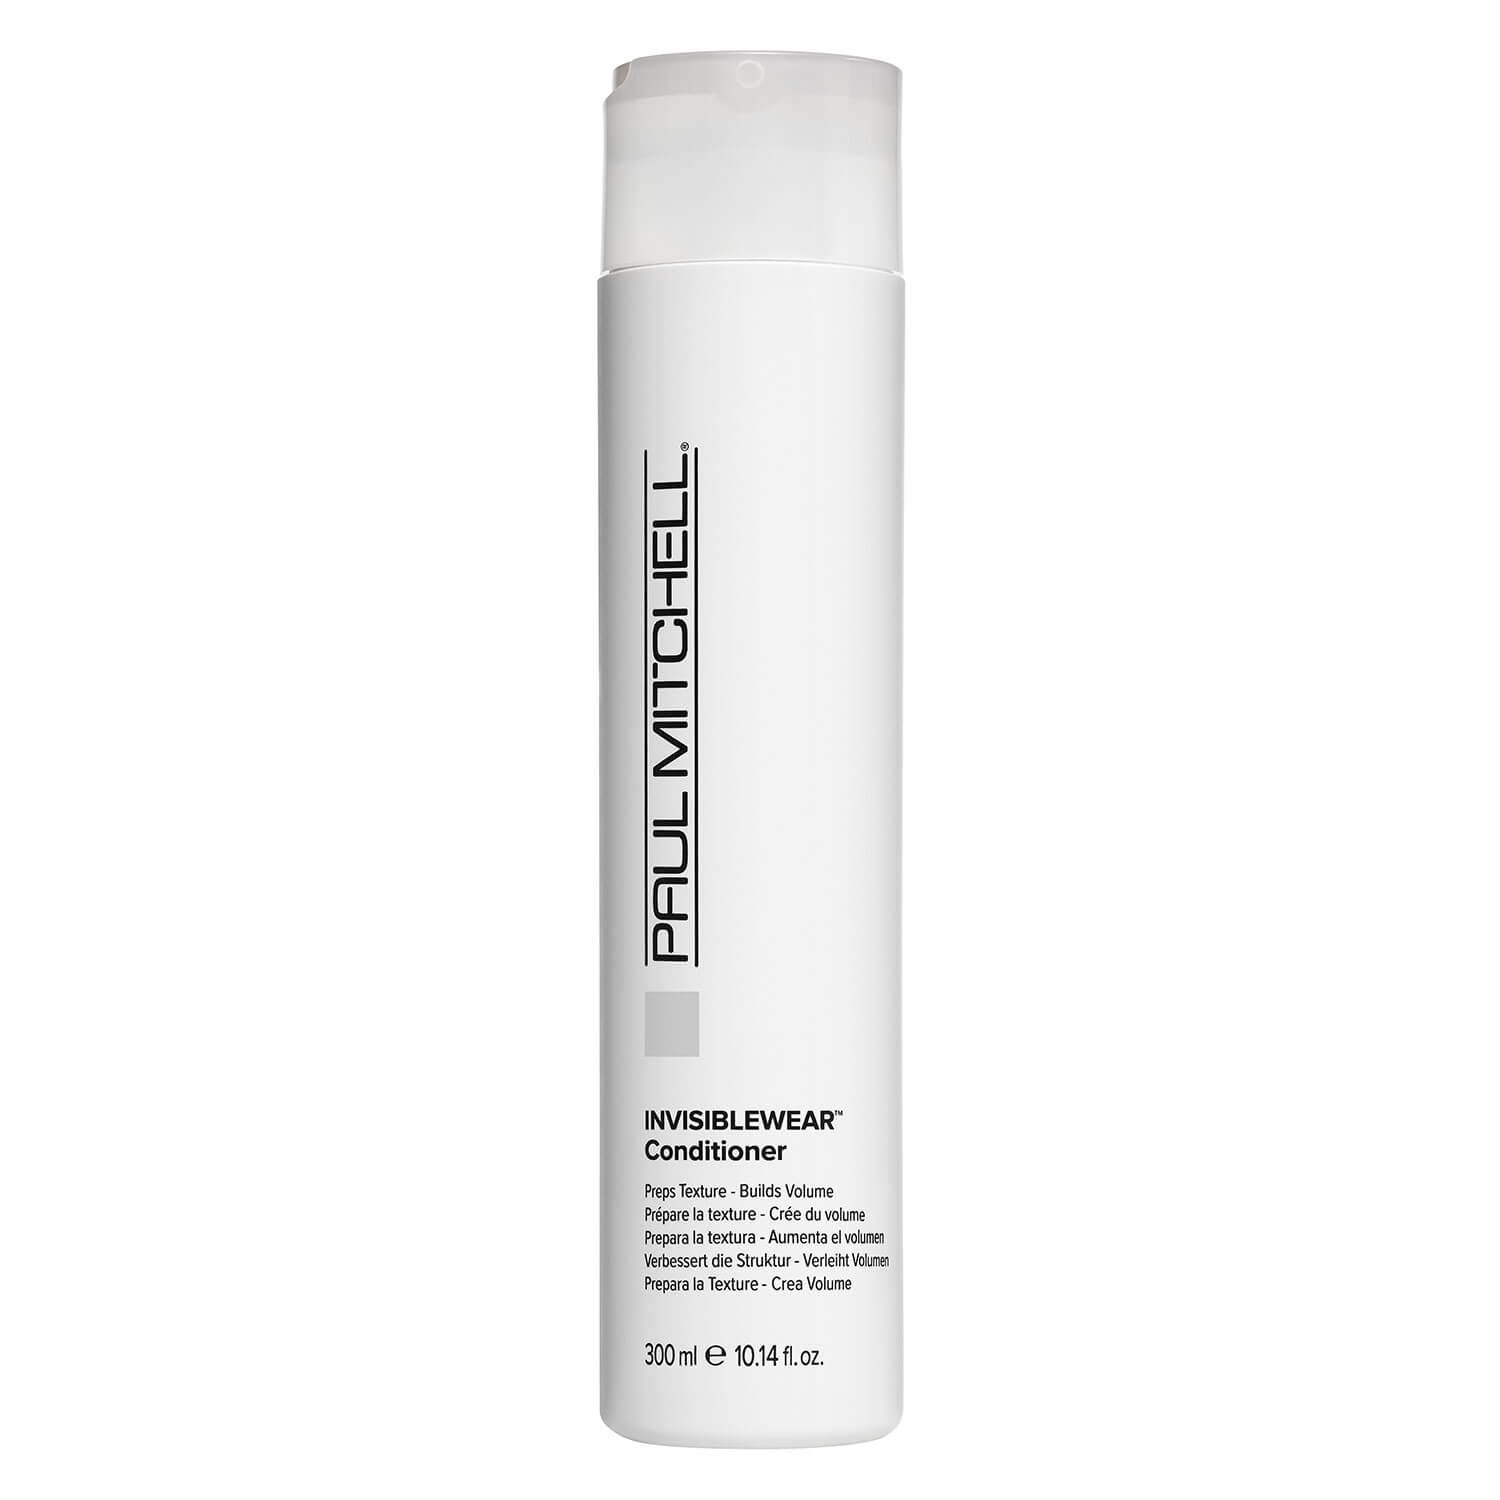 Product image from Invisiblewear - Conditioner